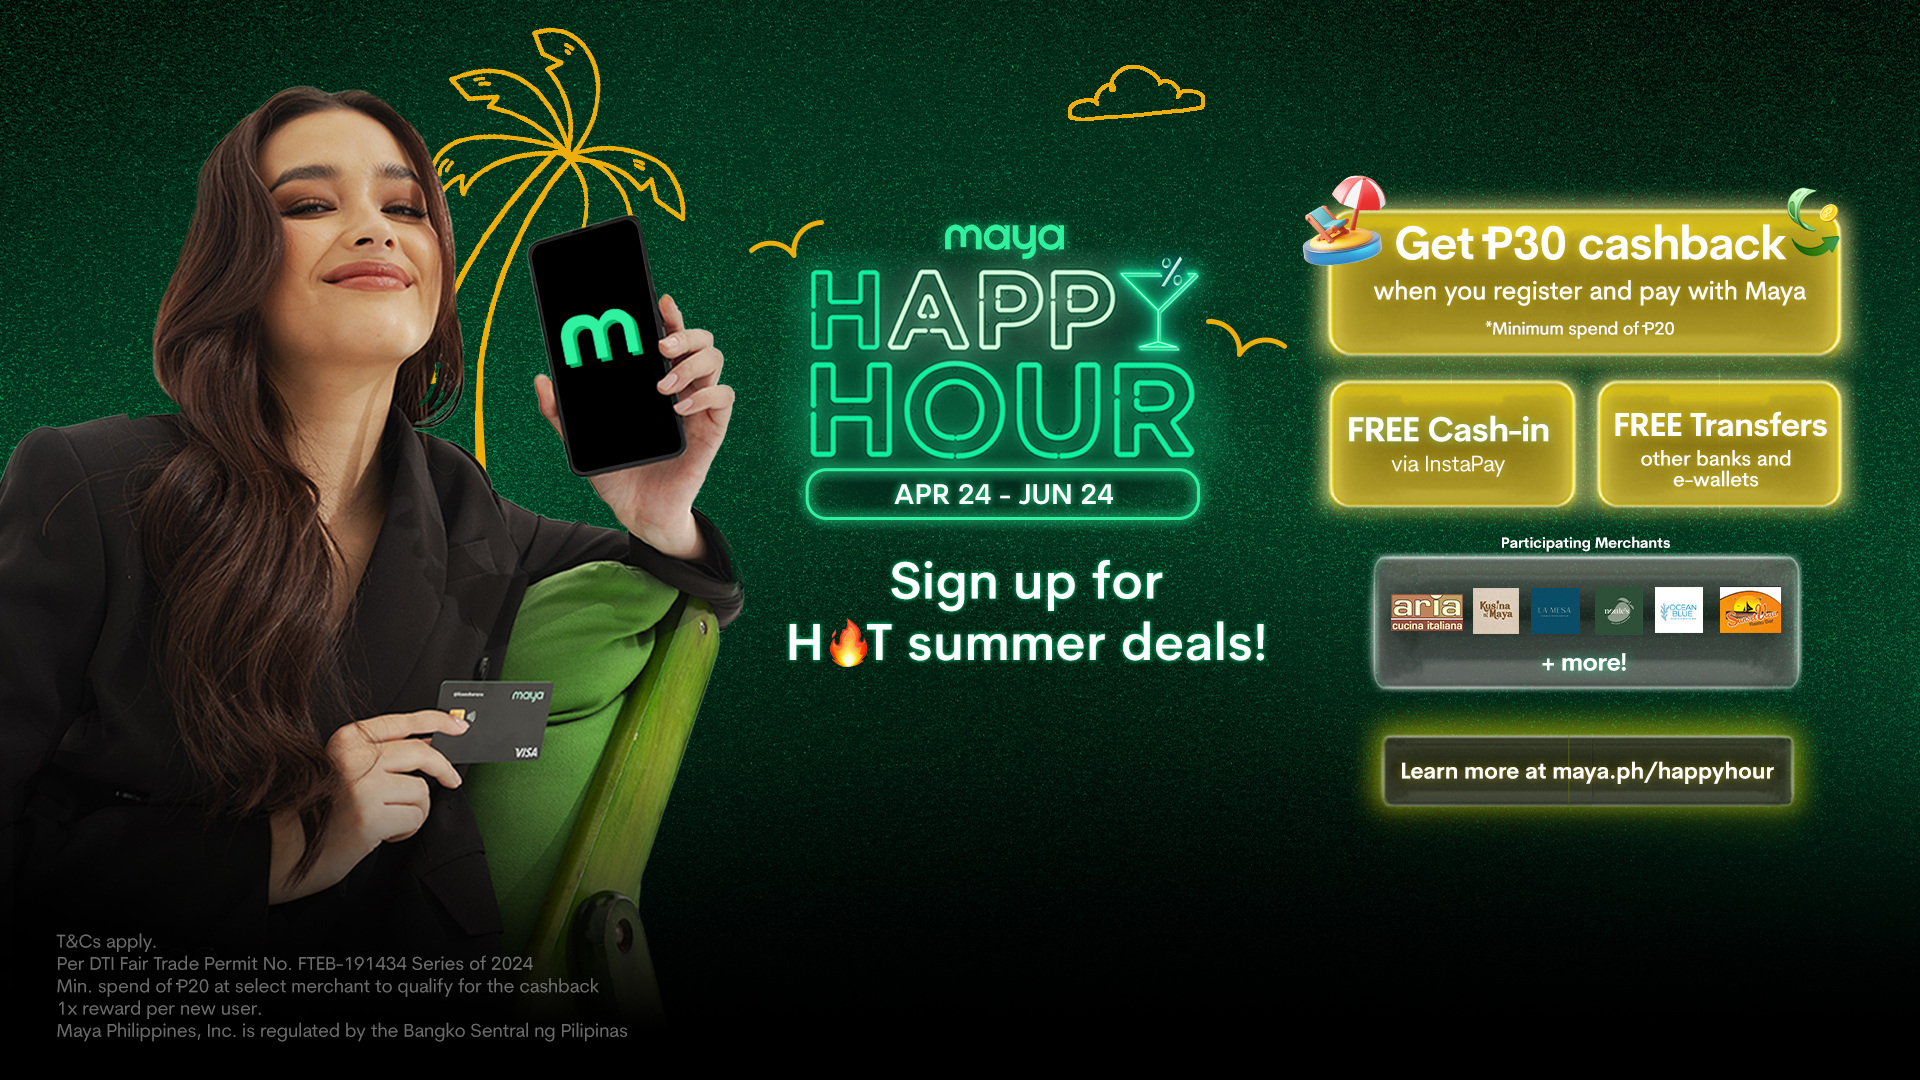 Get ₱30 cashback and more at your favorite summer destinations this Happy Hour!